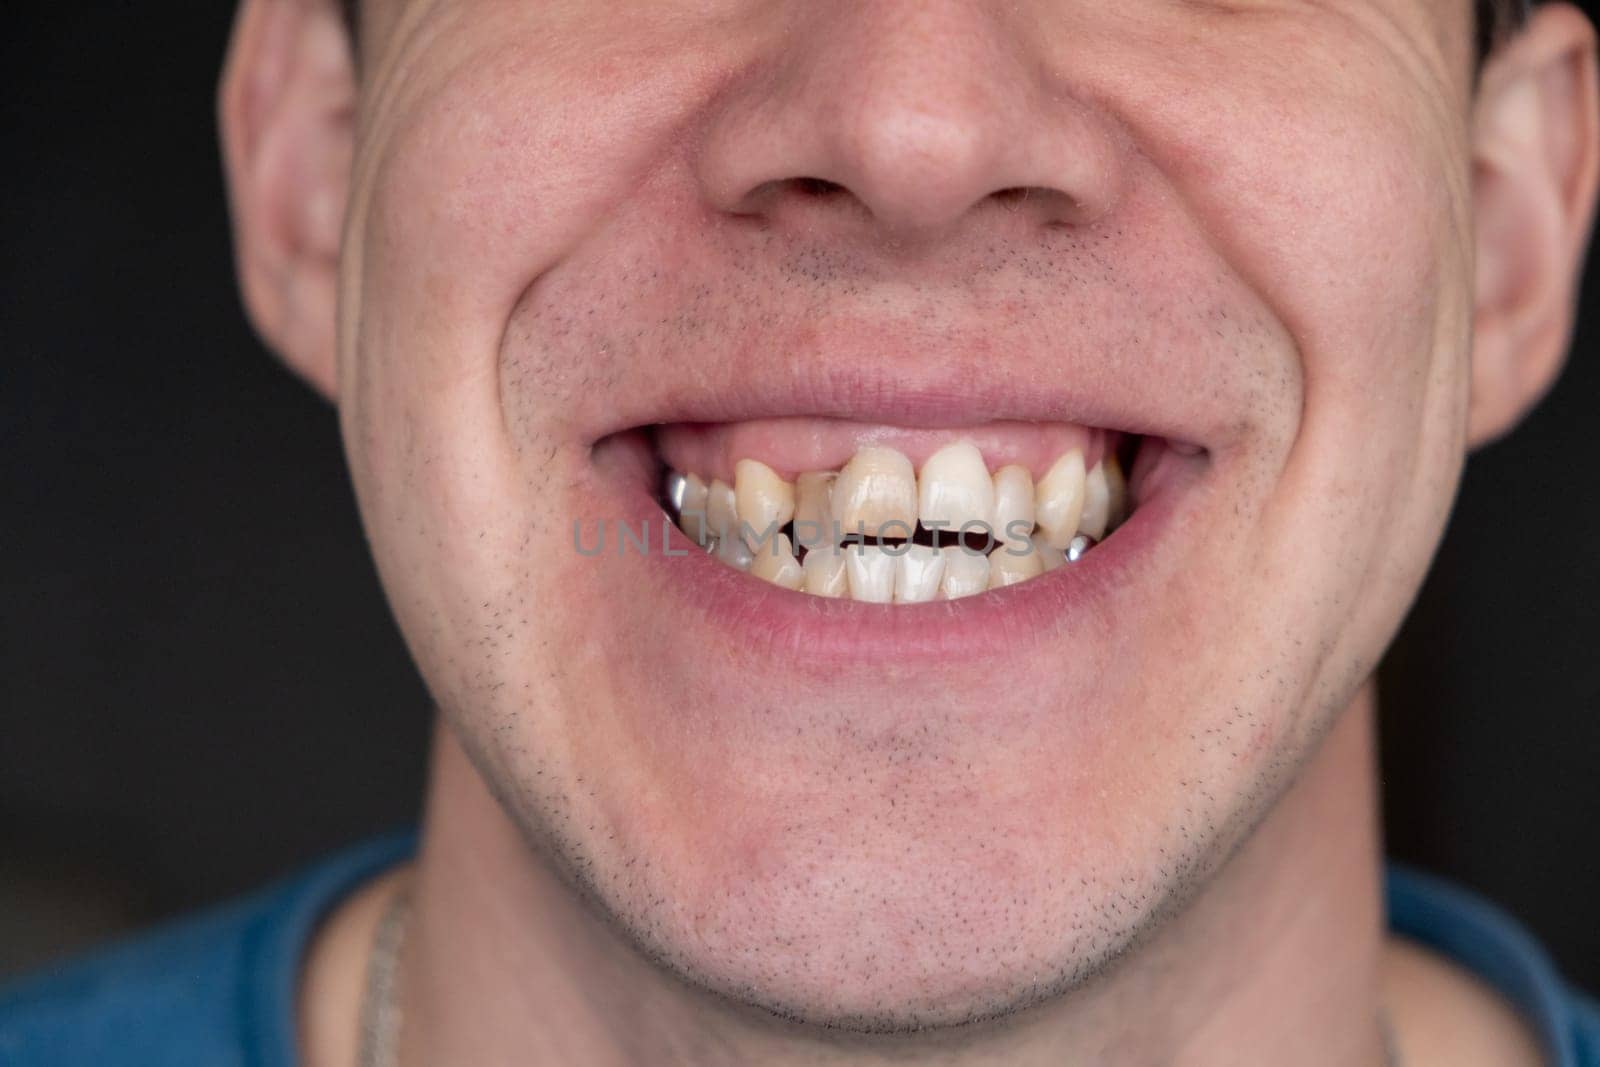 A man's crooked teeth. Young man showing crooked growing teeth. by AnatoliiFoto